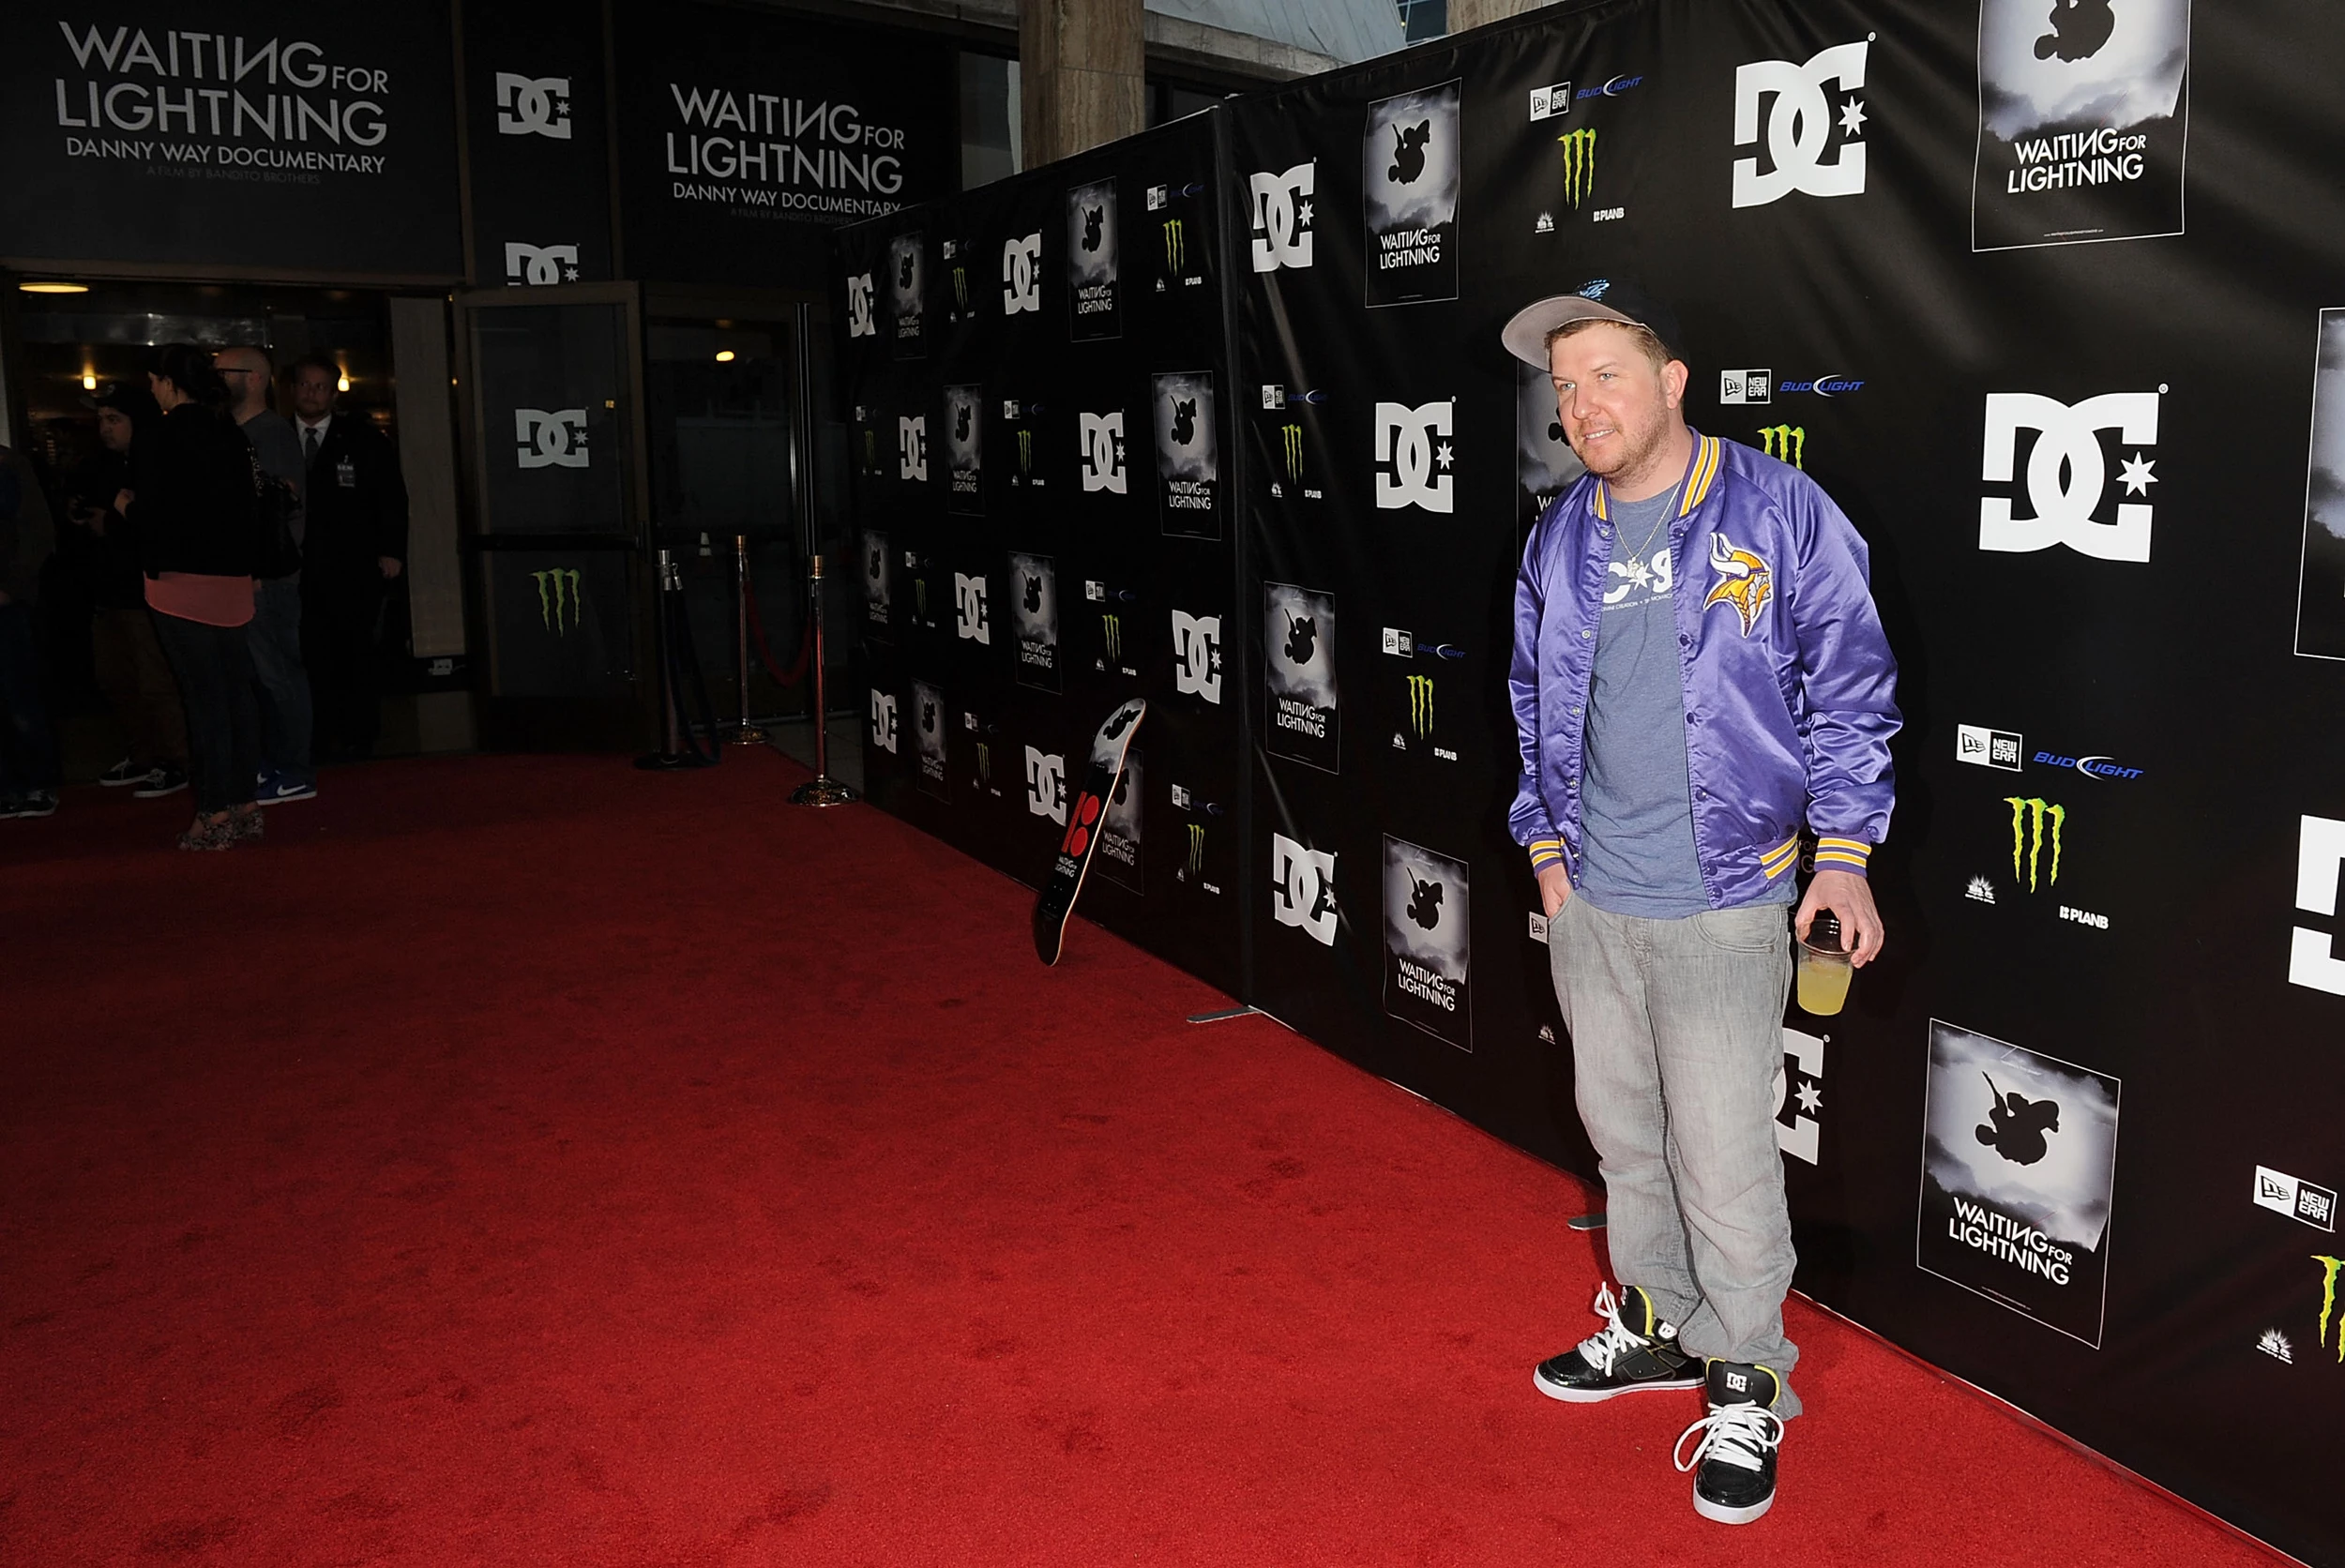 DC Shoes Presents The Los Angeles Screening Of "Waiting For Lightning" A Documentary About Skateboarder Danny Way